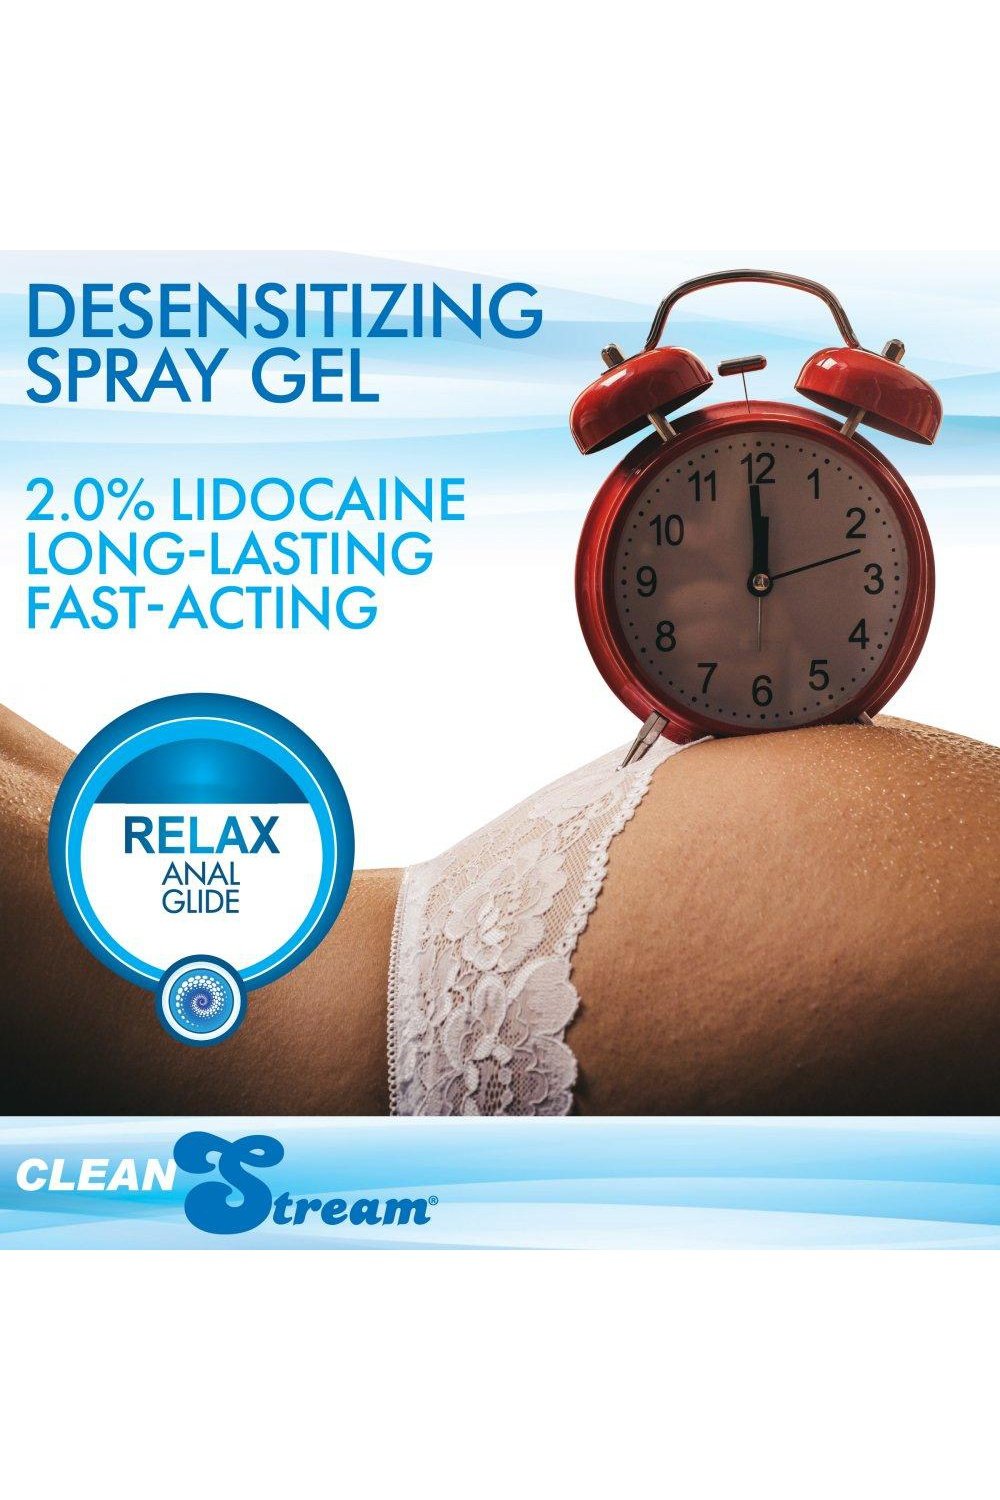 CleanStream Relax Desensitizing Anal Lube 4 oz - Sex On the Go